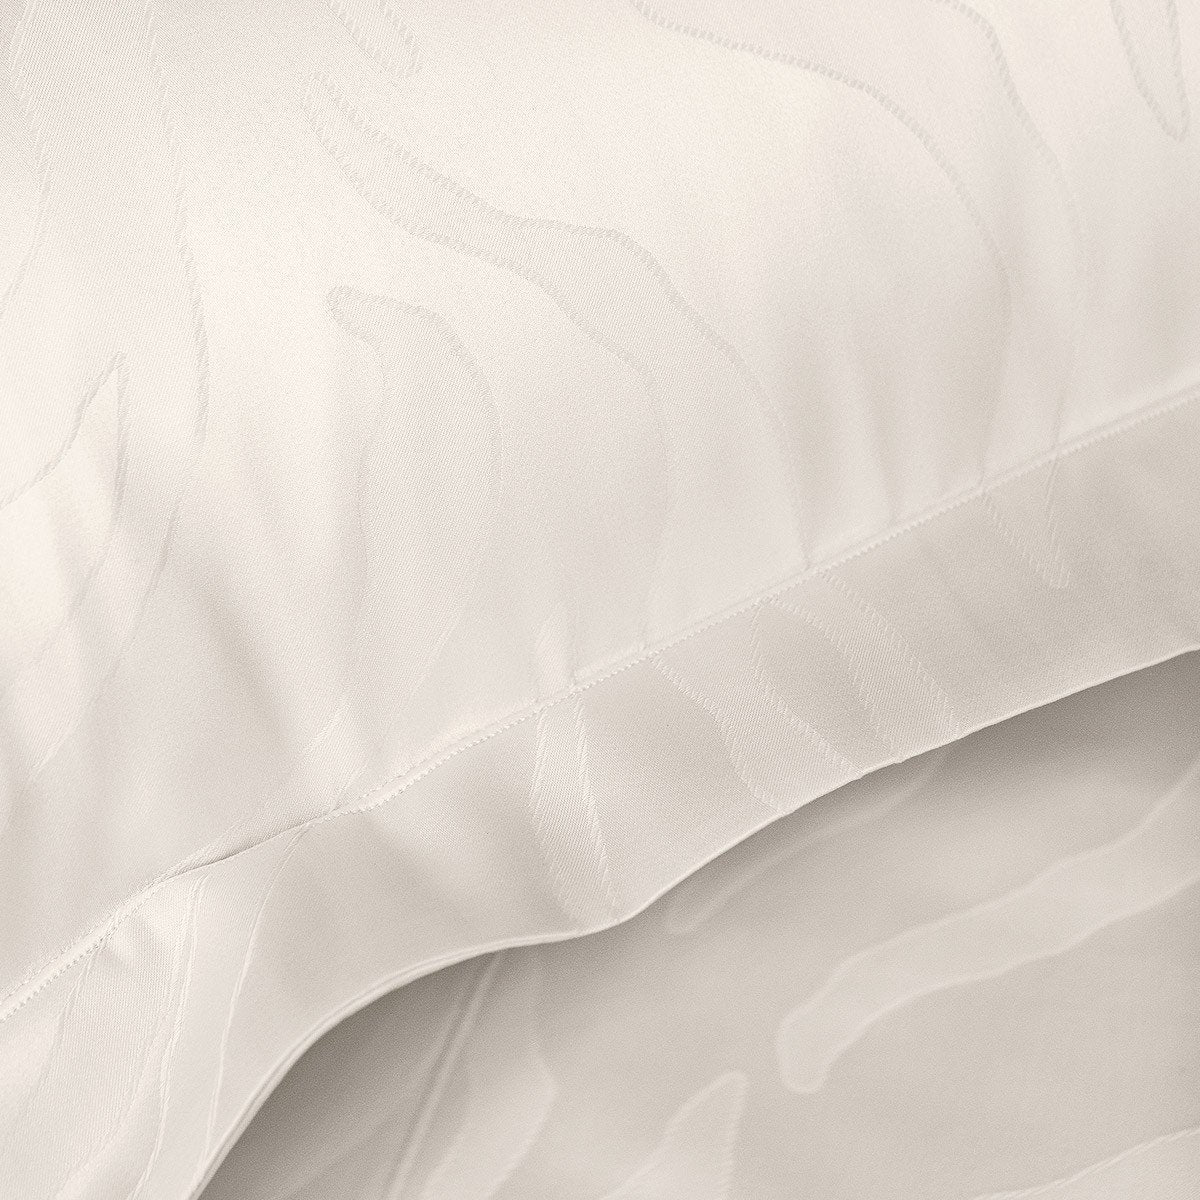 Amazone Bedding - Clearance Sale - Yves Delorme